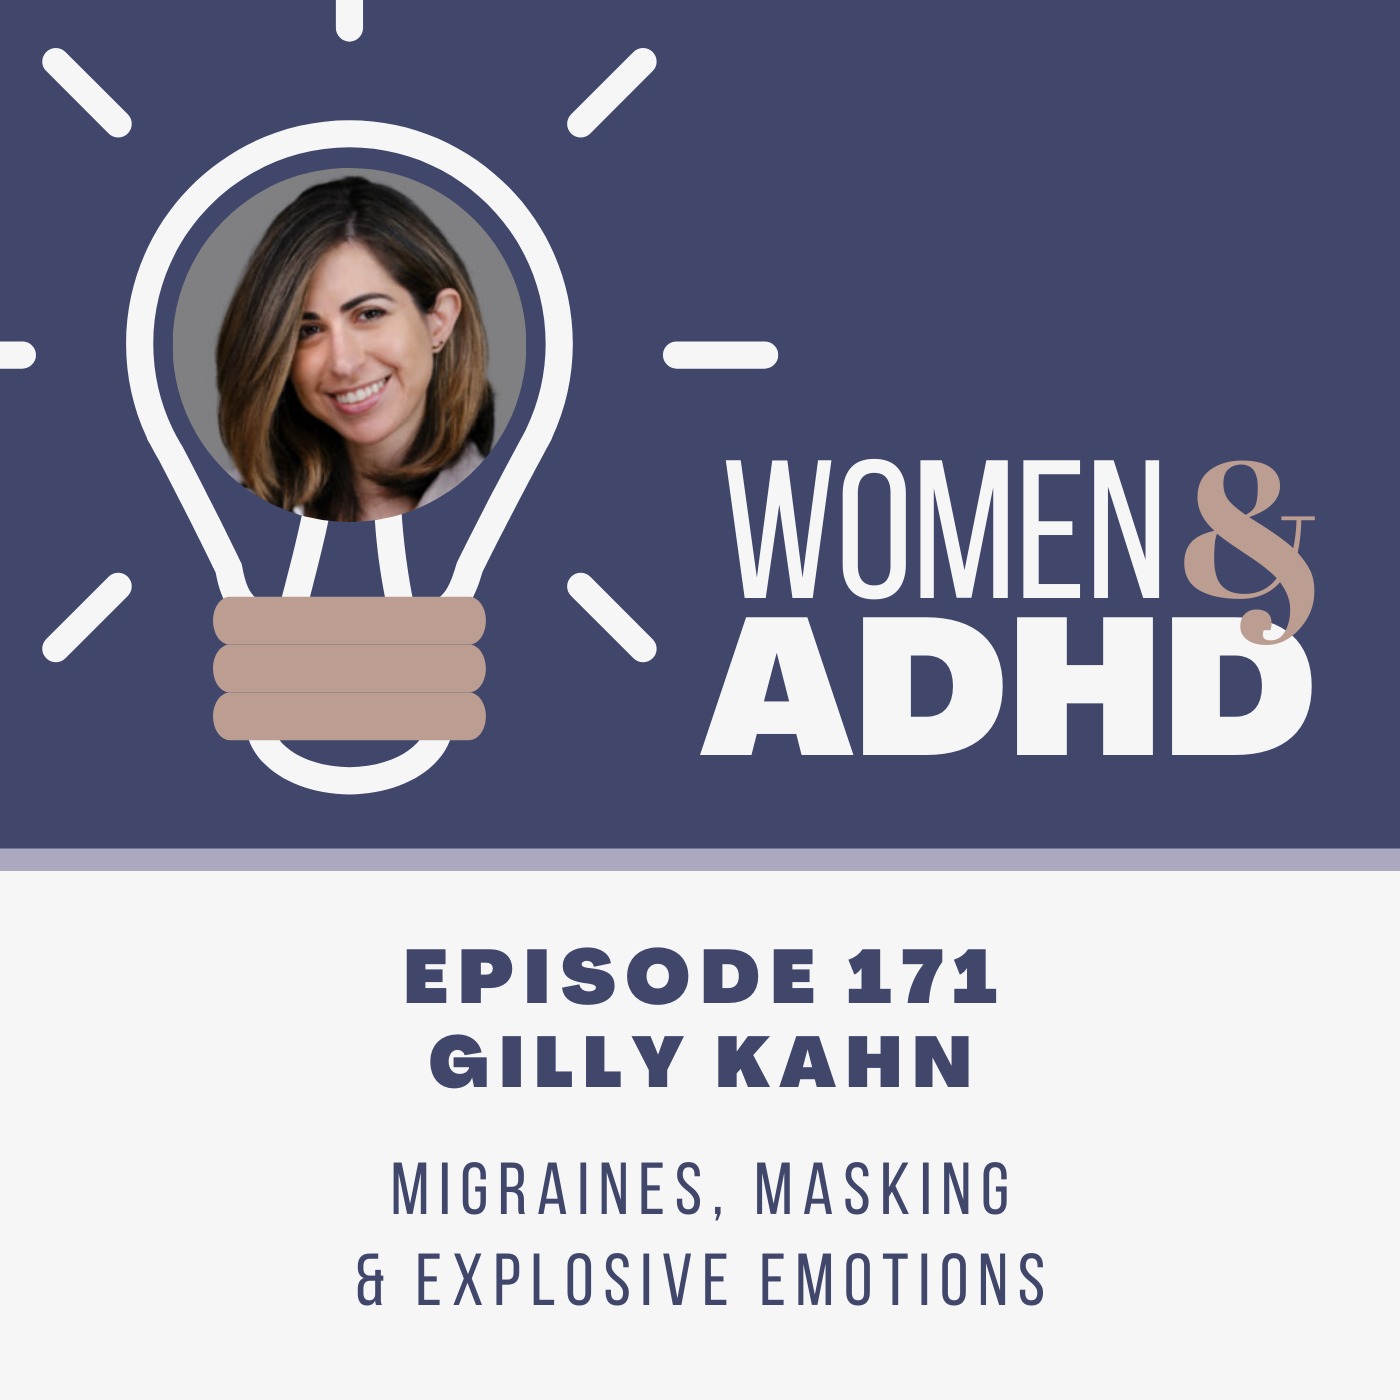 Gilly Kahn: Migraines, masking & explosive emotions